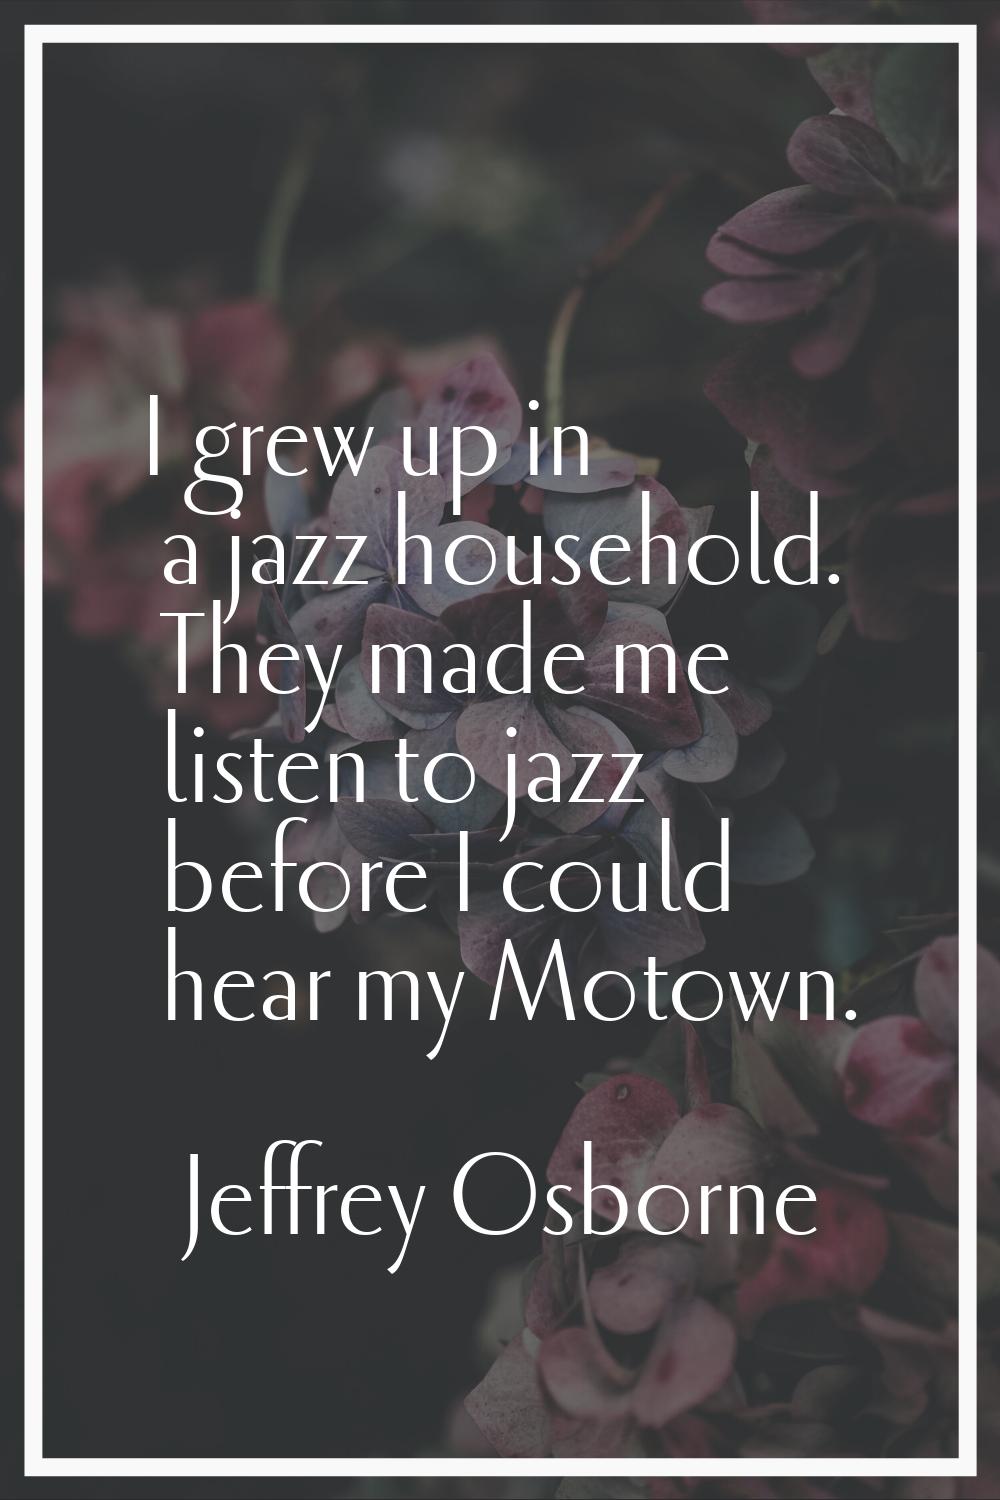 I grew up in a jazz household. They made me listen to jazz before I could hear my Motown.